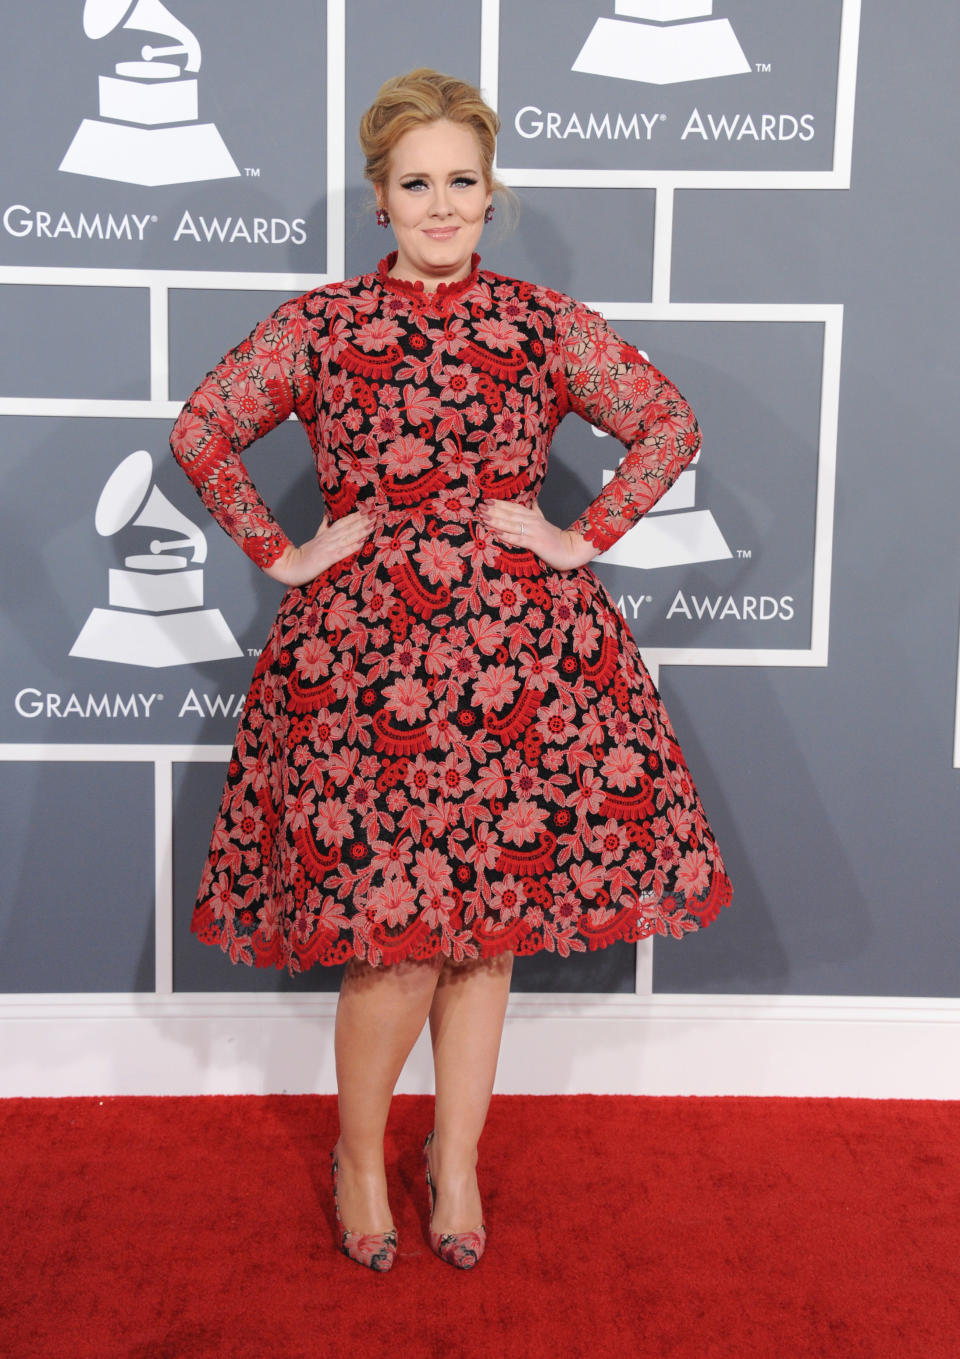 Adele arrives at the 55th annual Grammy Awards on Sunday, Feb. 10, 2013, in Los Angeles.  (Photo by Jordan Strauss/Invision/AP)